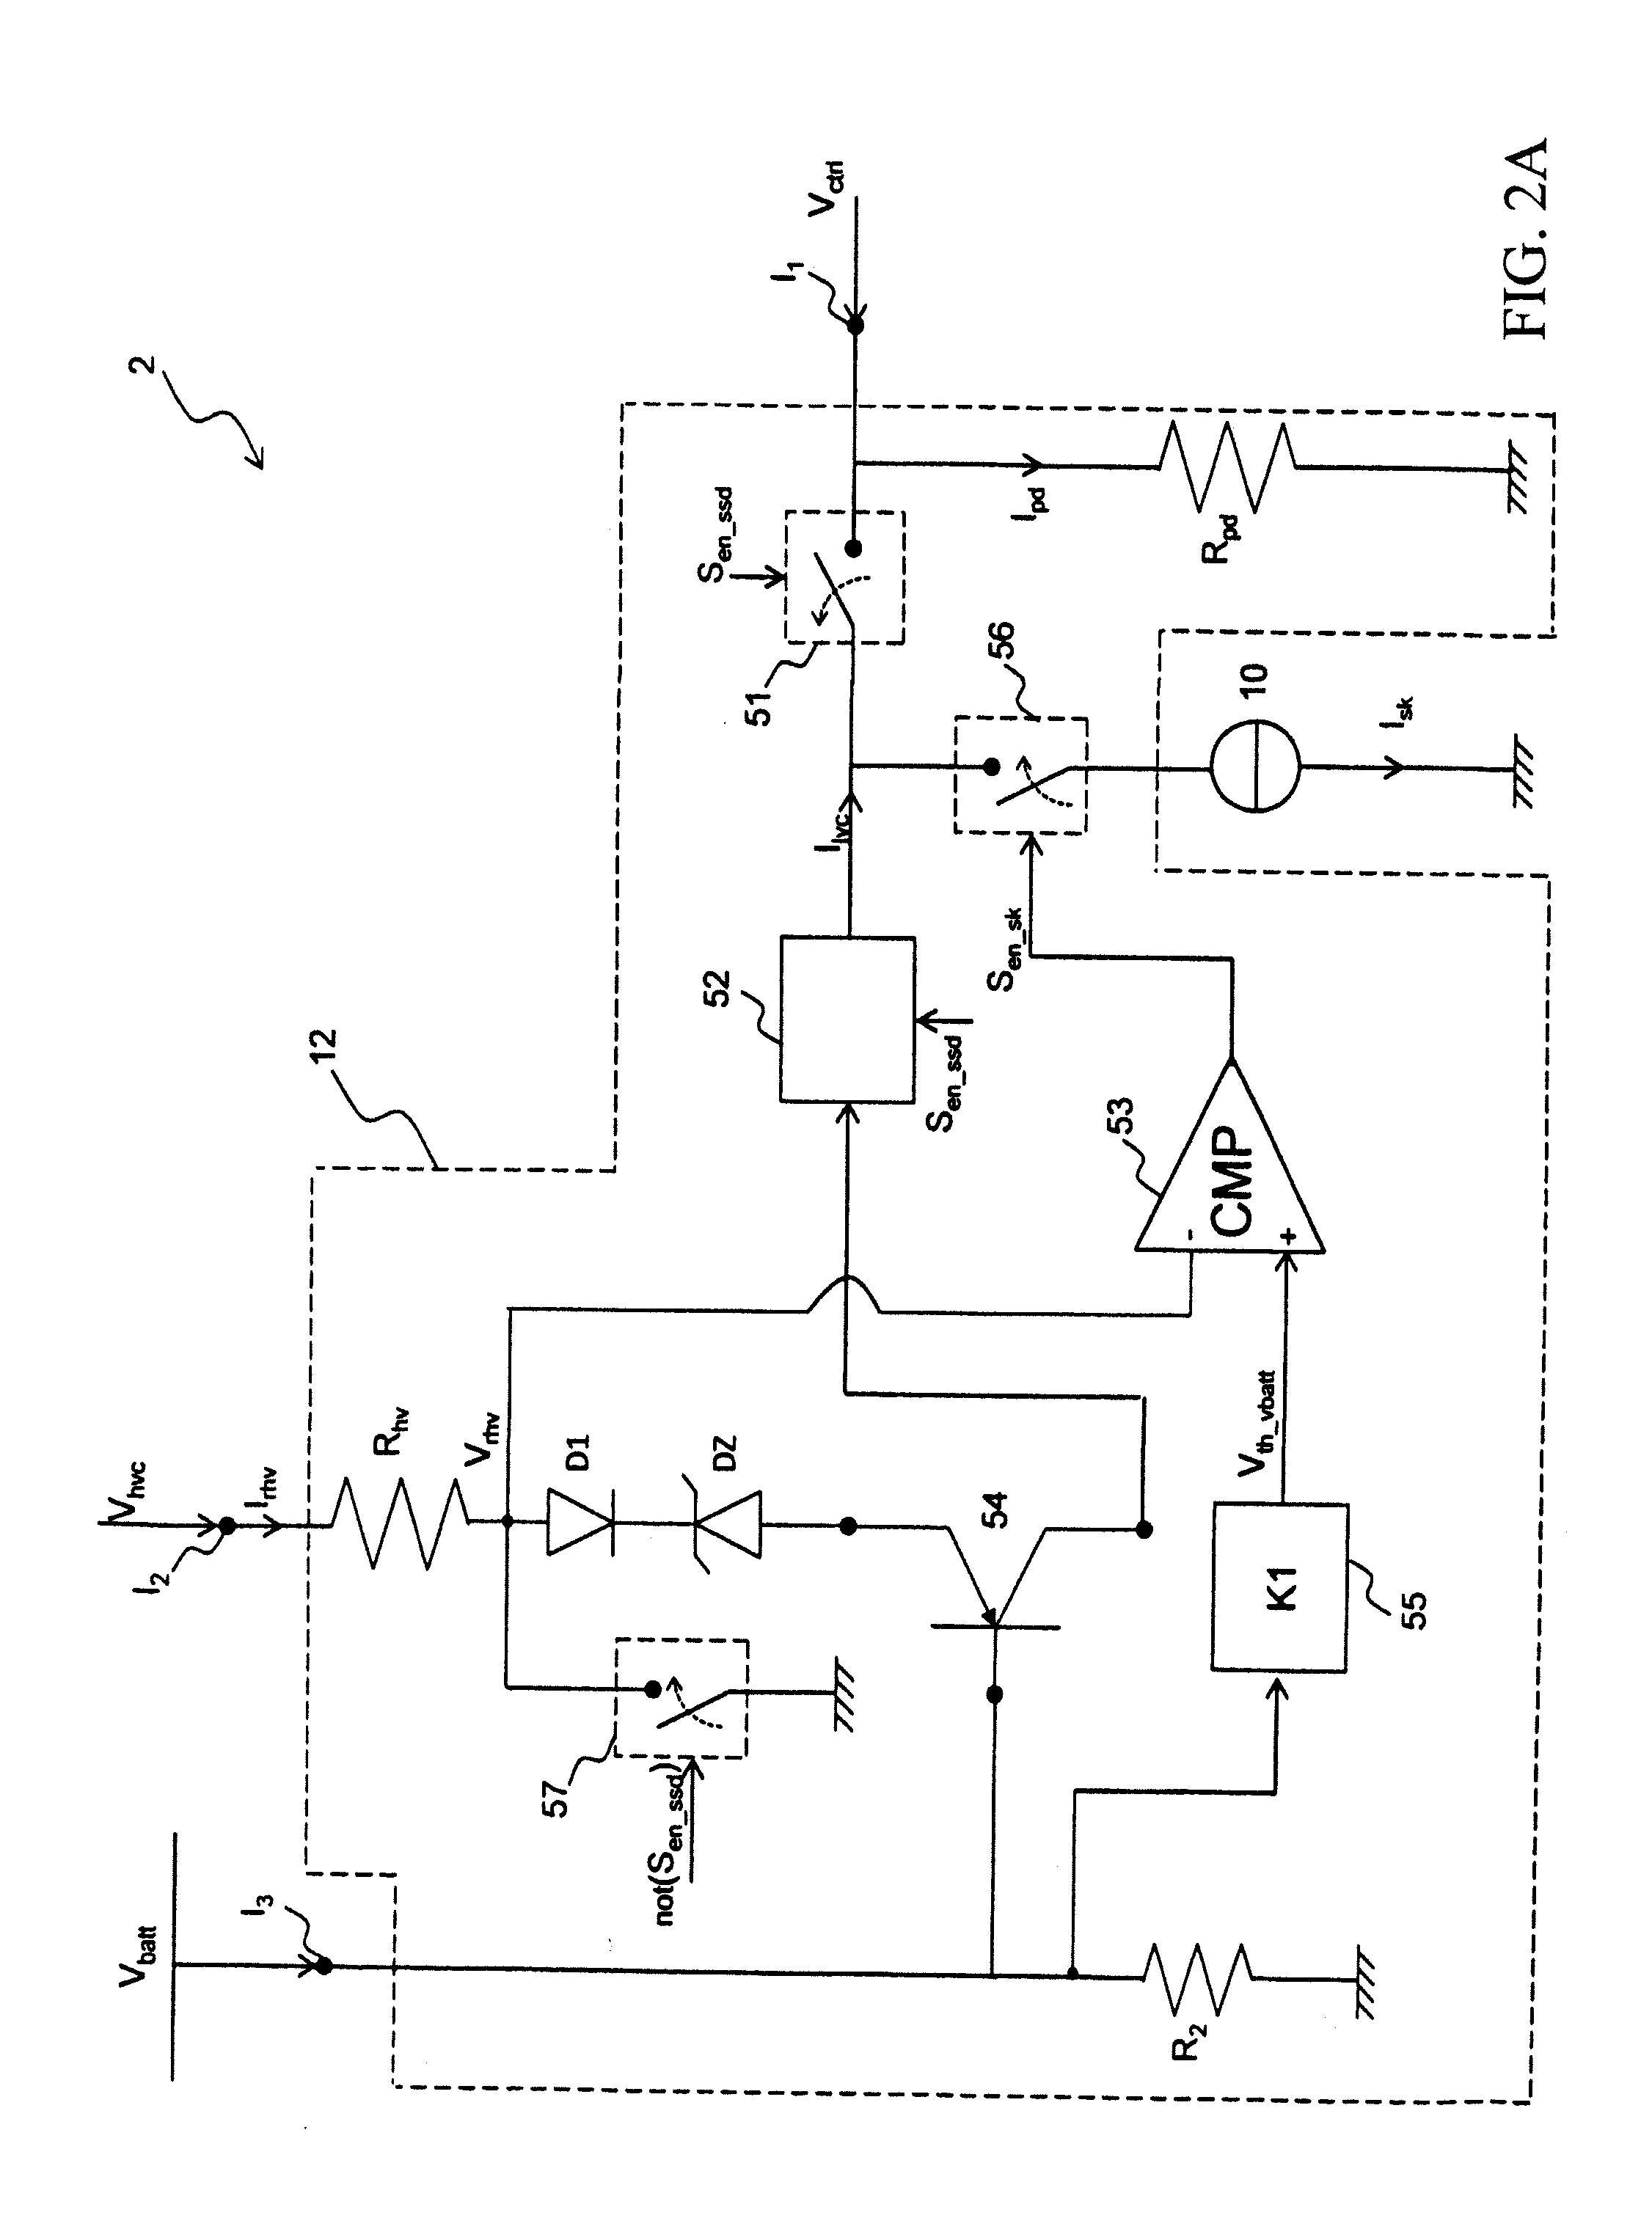 Electronic ignition system for an engine of a vehicle in case of failure